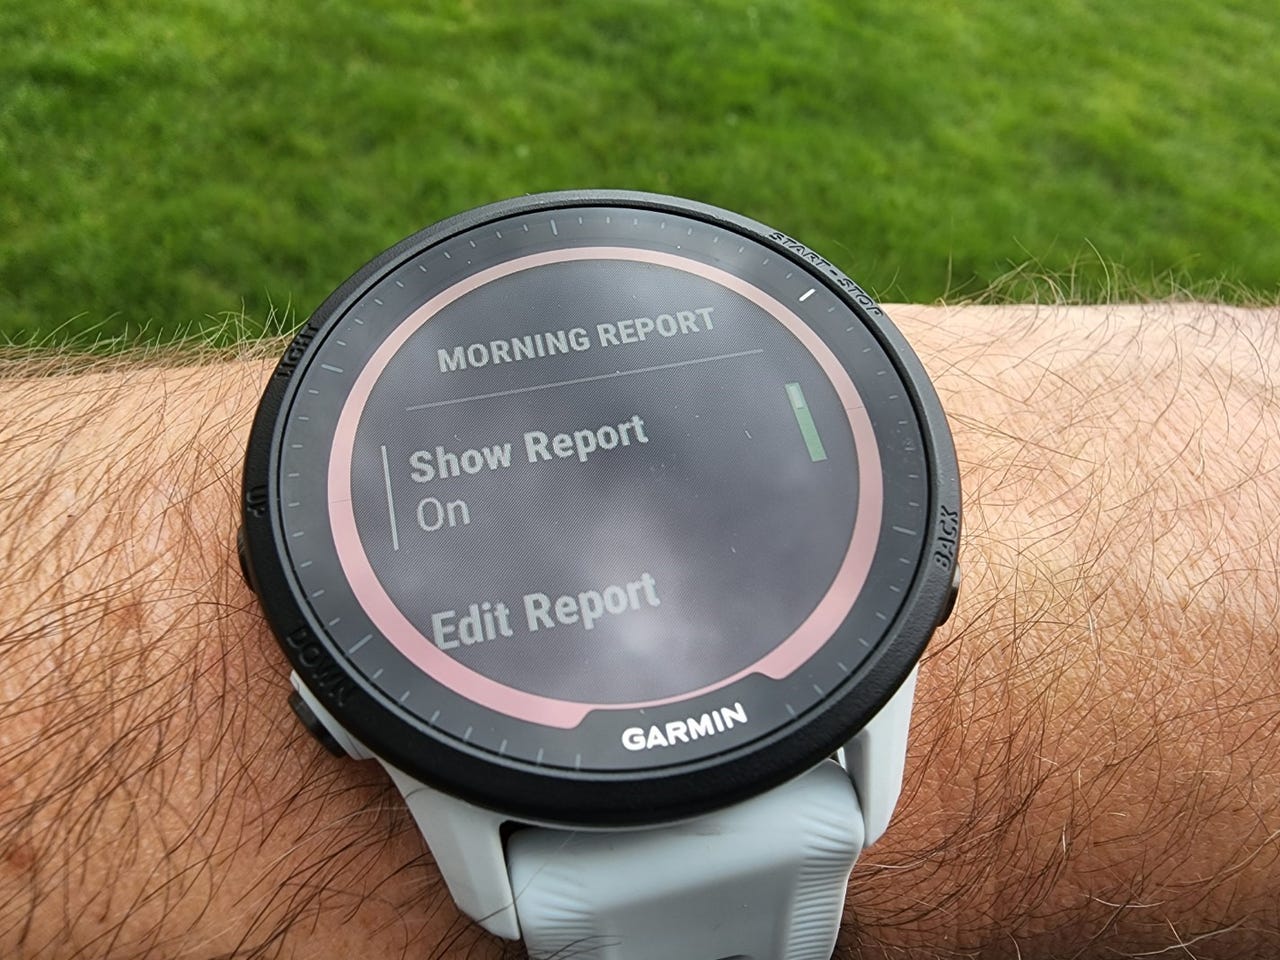 One week with Garmin's newly announced Forerunner 945 LTE and